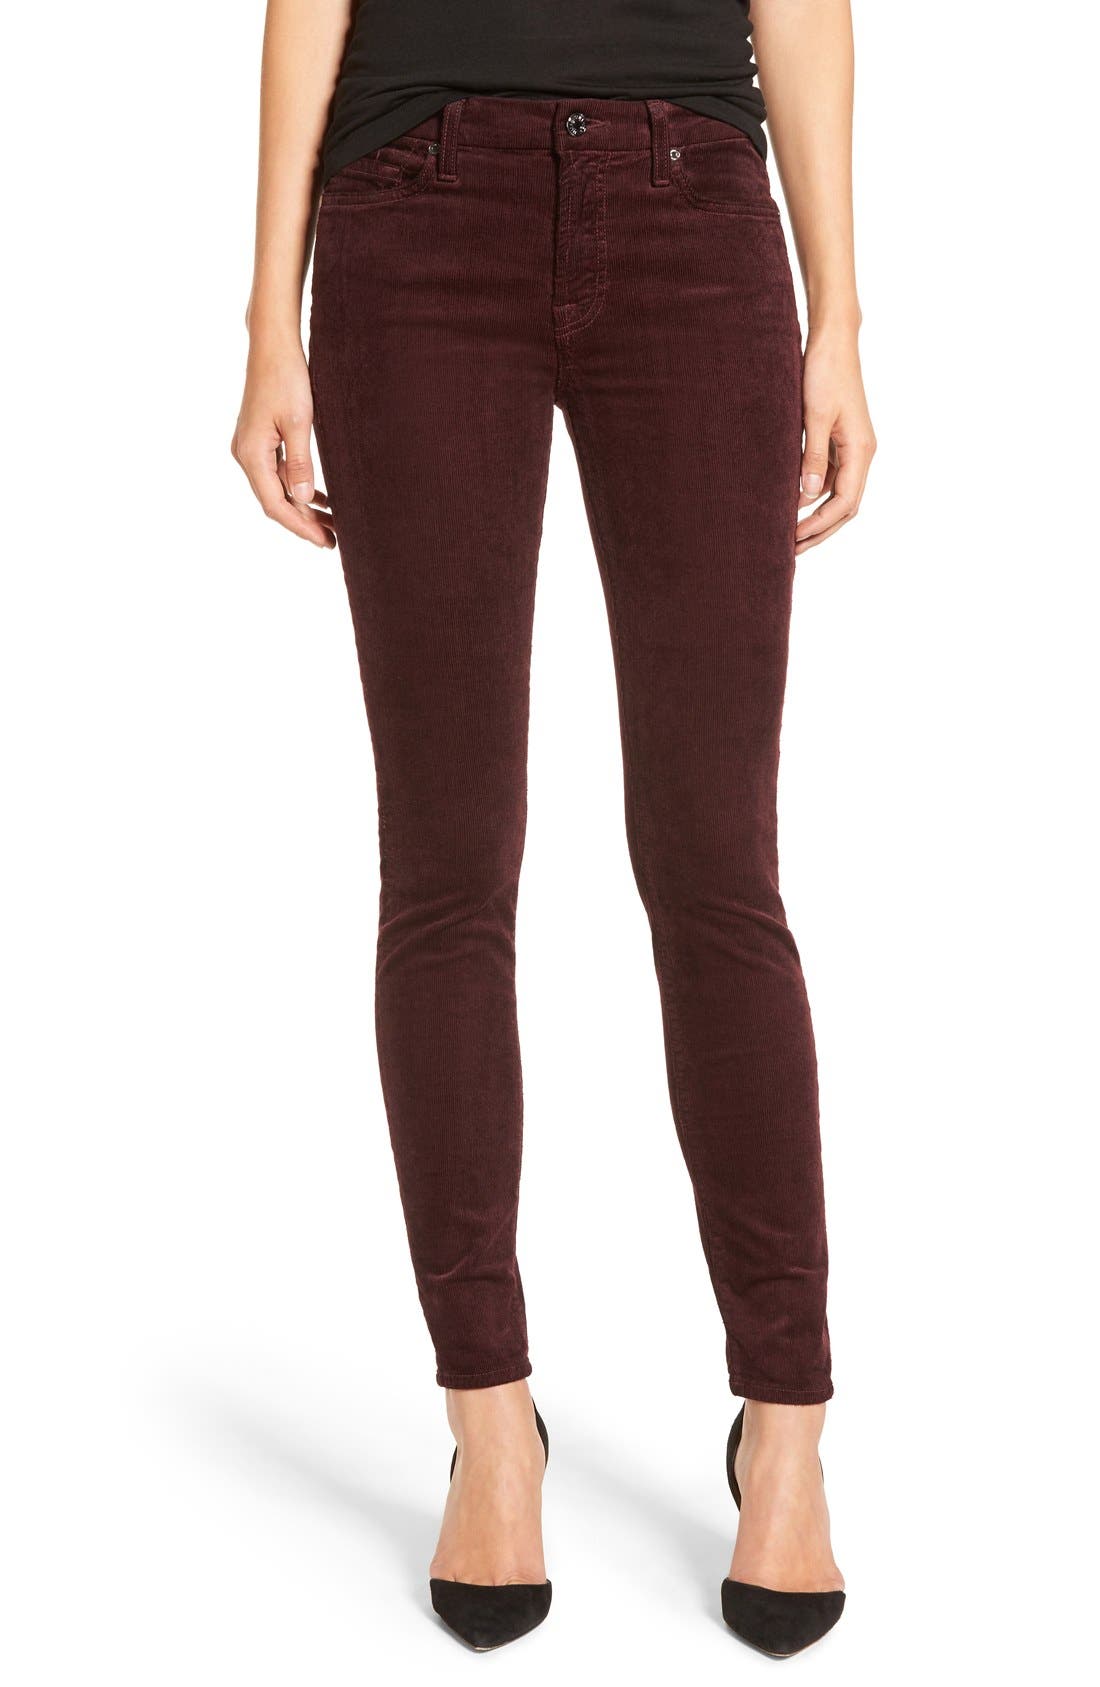 7 for all mankind corduroy pants